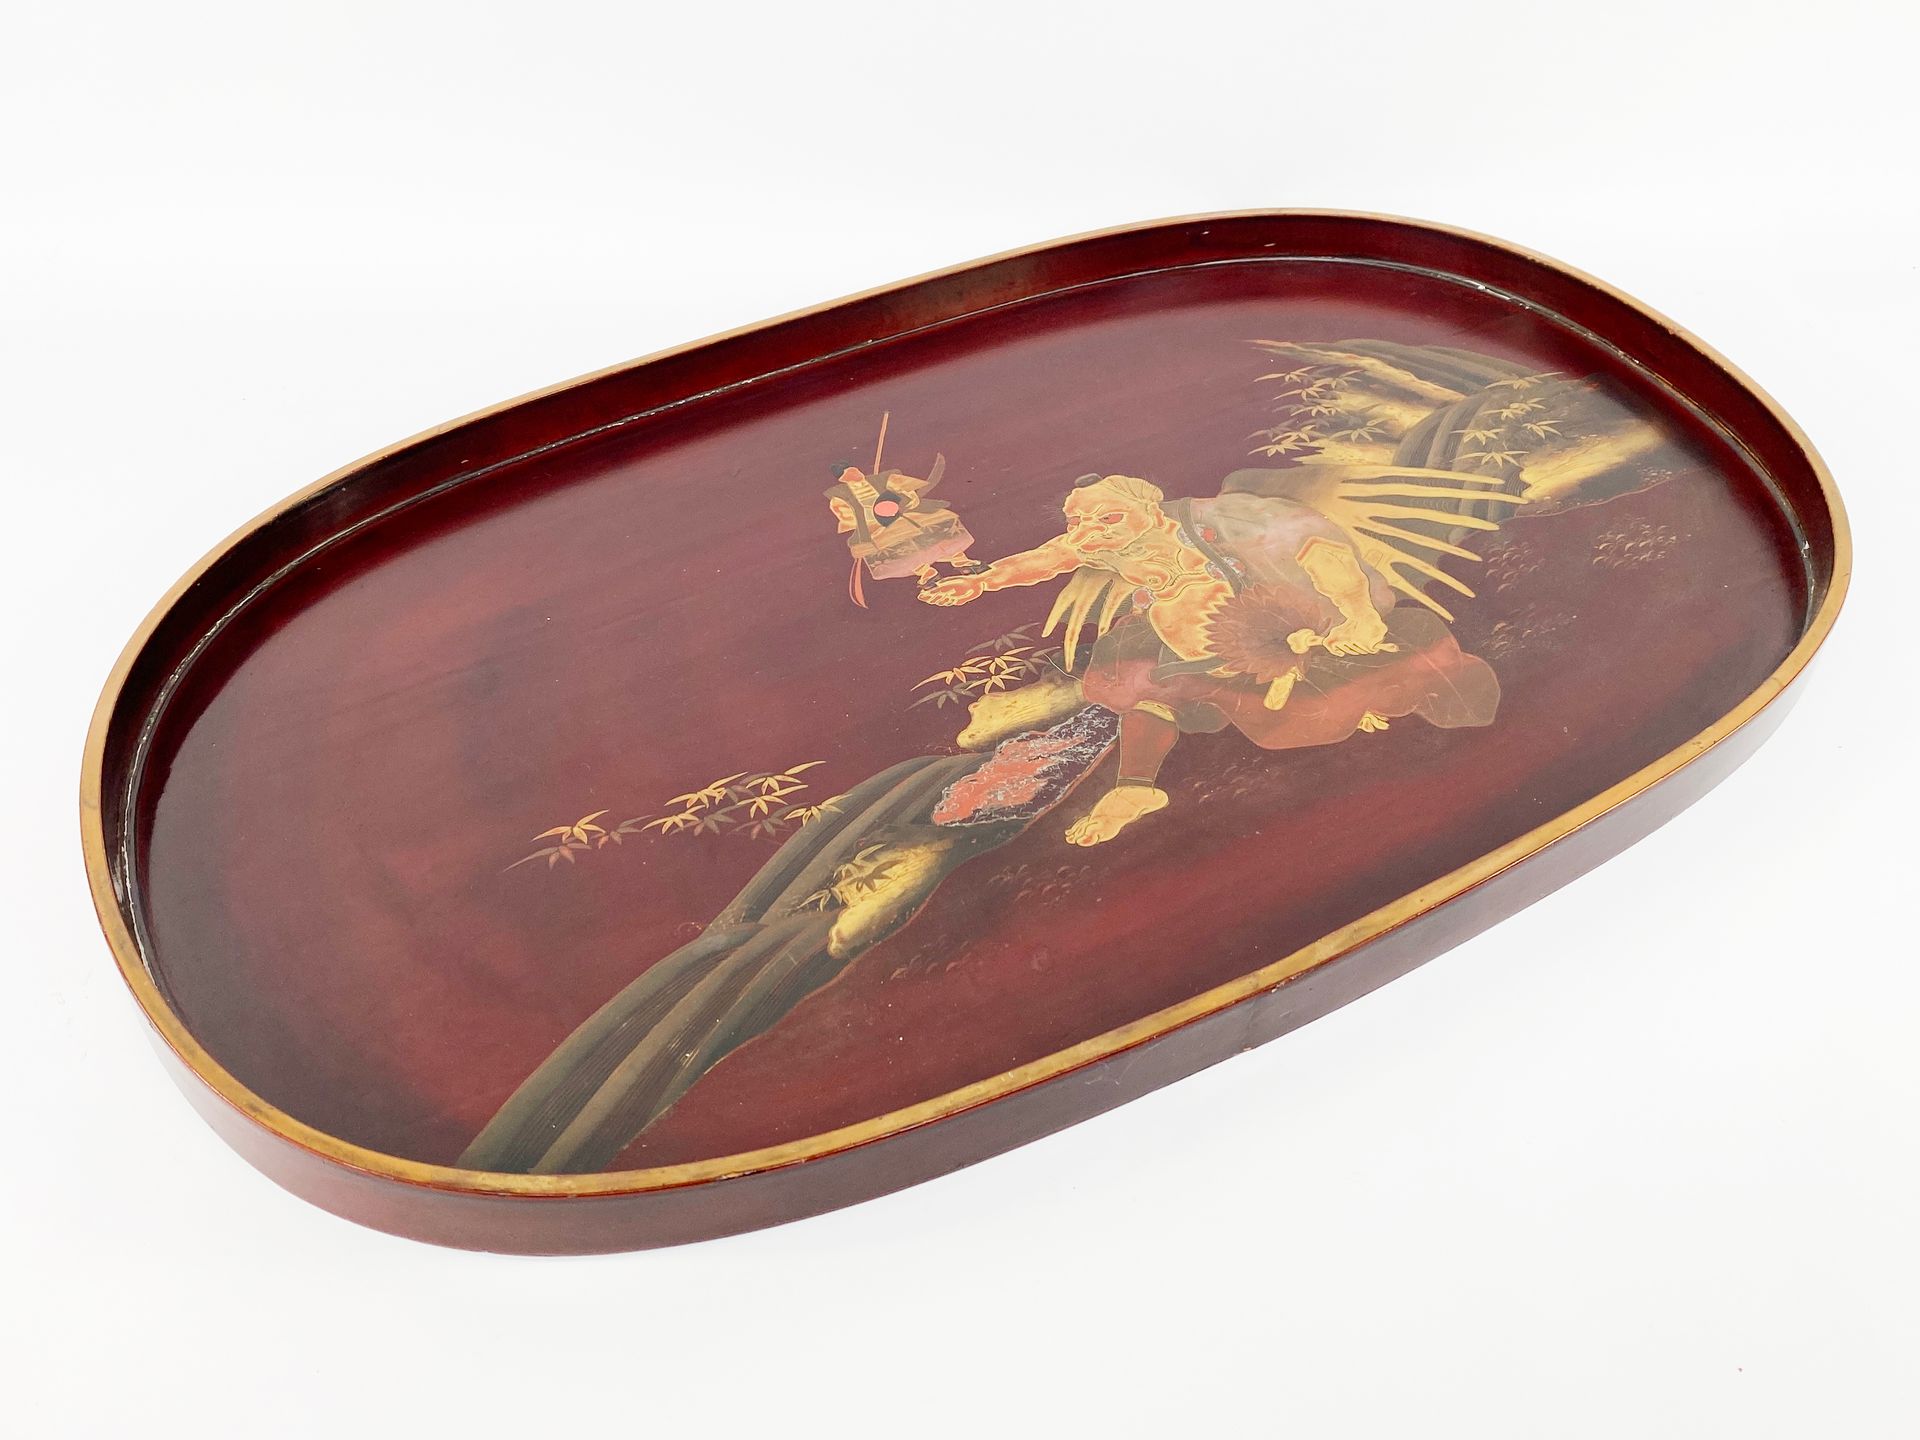 Null JAPAN,

Oval tray in red lacquered wood with gold highlights showing a calf&hellip;